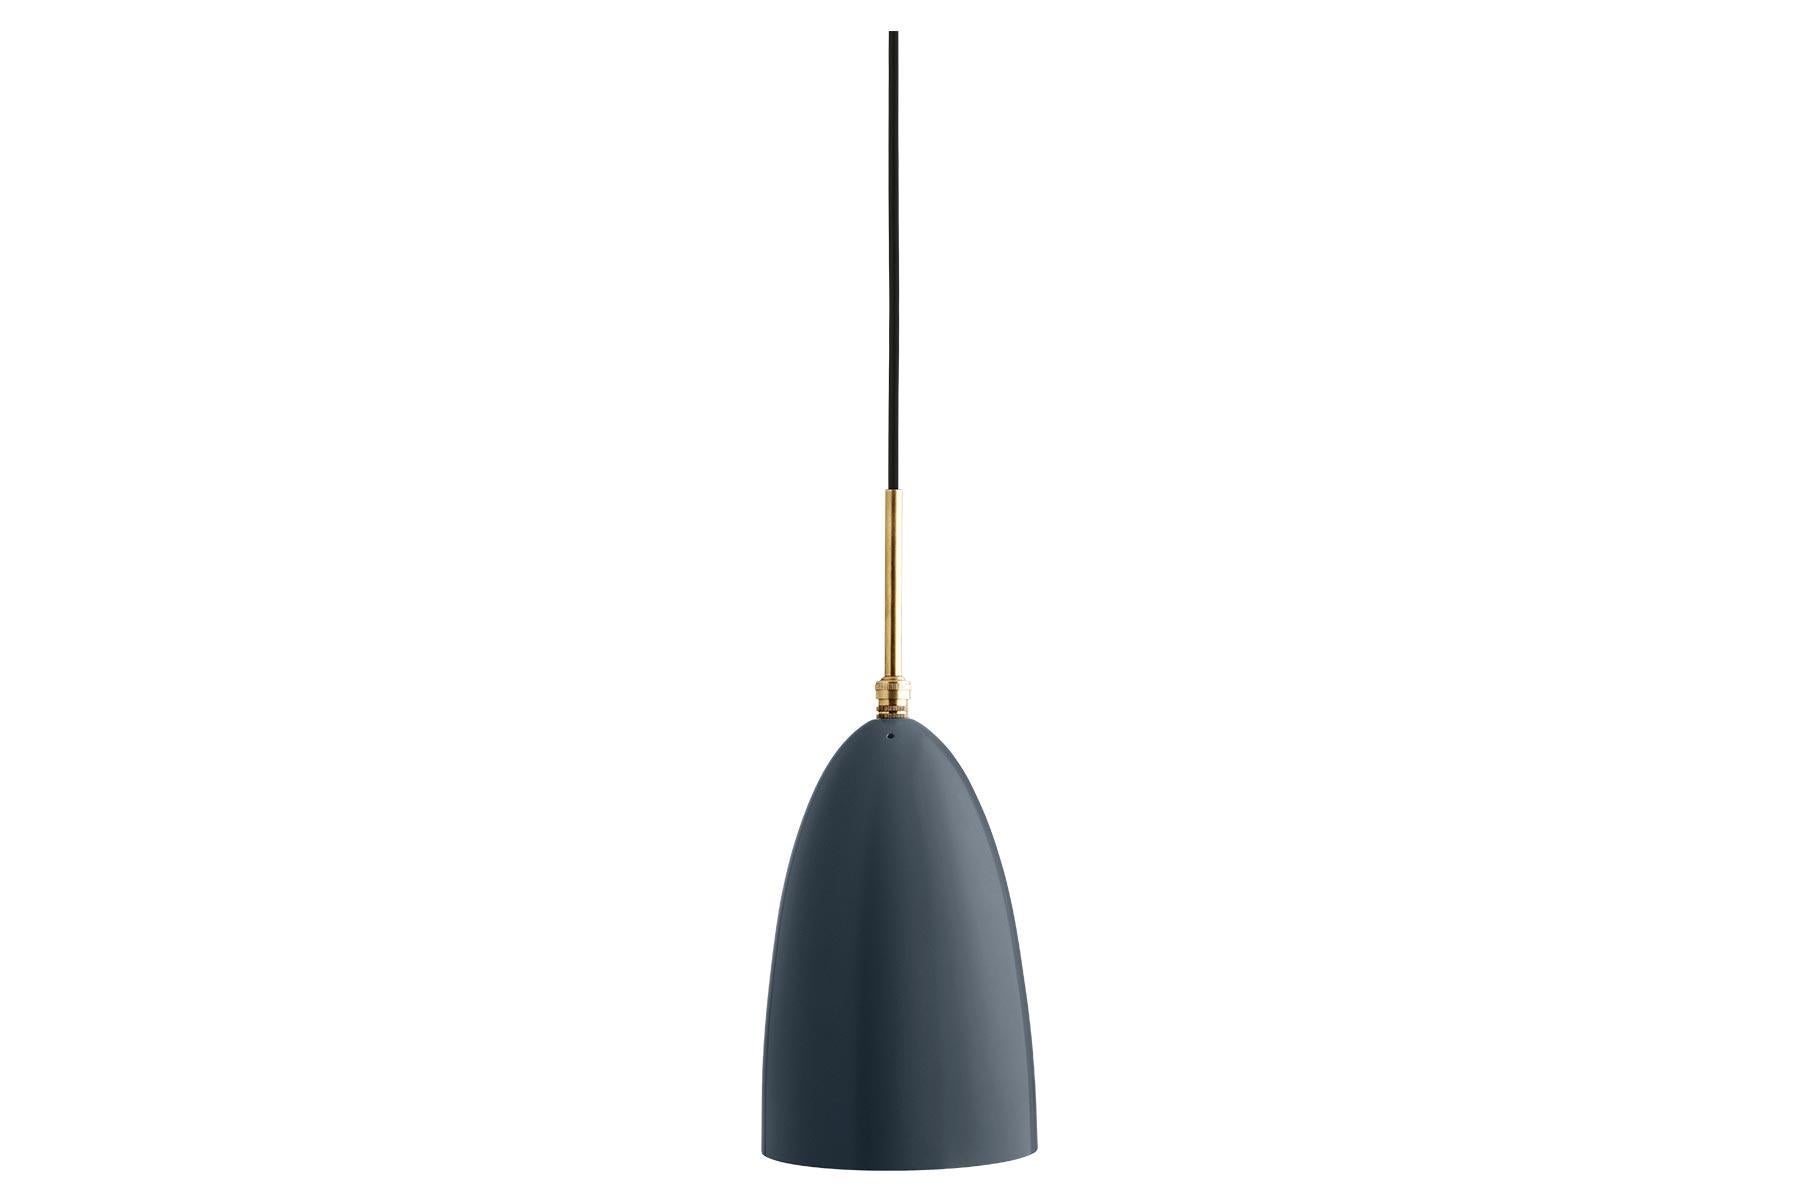 The Gräshoppa pendant has emerged from Greta M. Grossman’s original lamp design from 1947, using the signature steel shade that successfully combines lightness and functionality into a modern yet organic character. The whimsical design language is